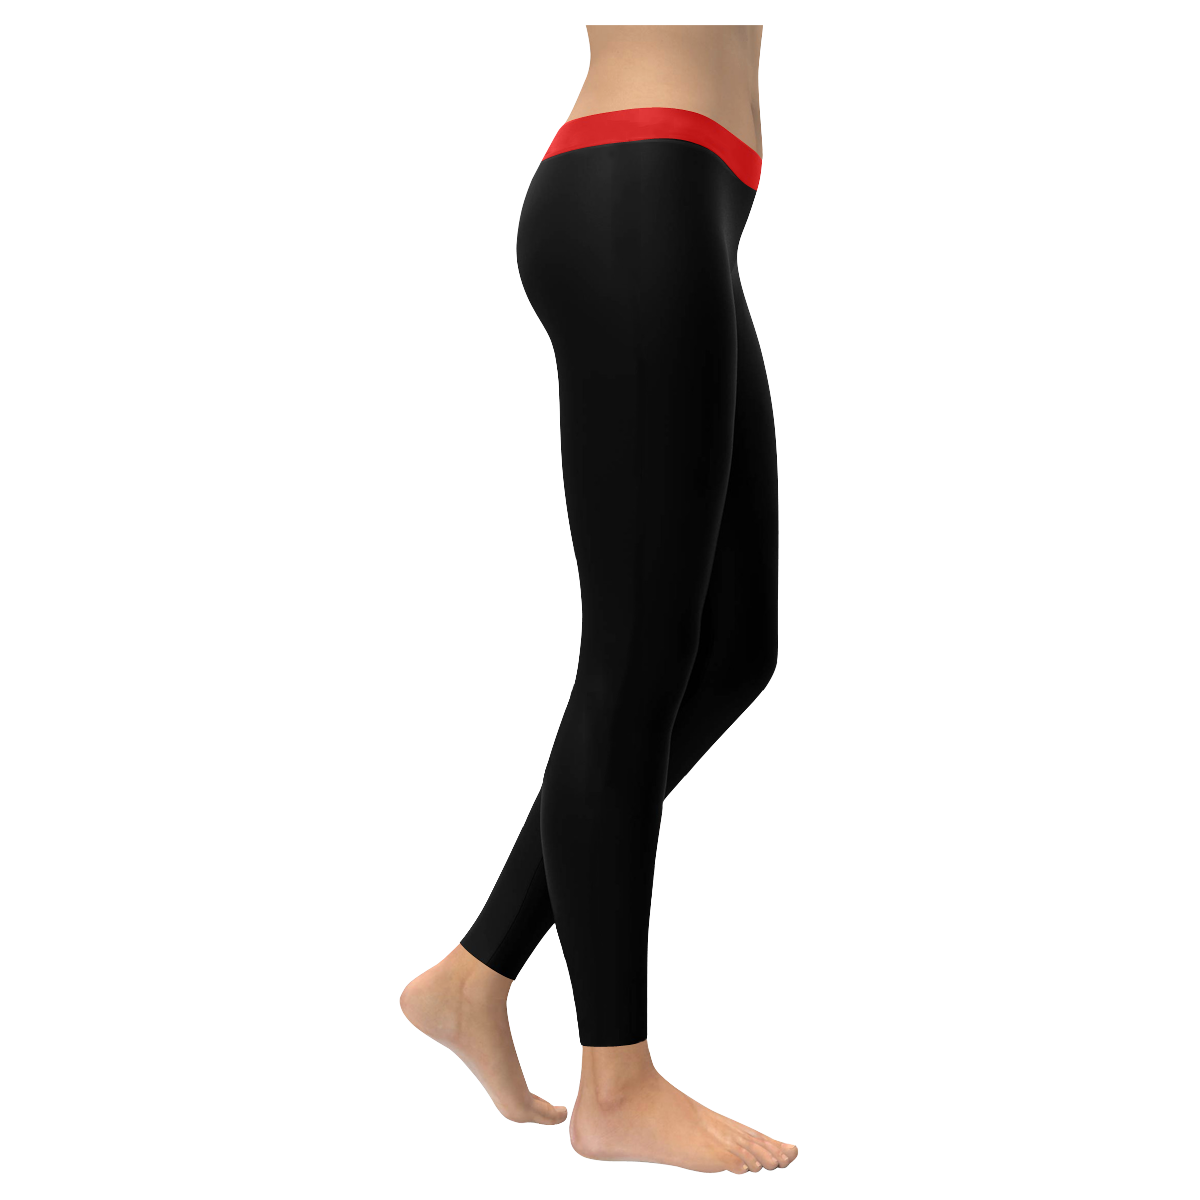 Japanese Sunset Women's Black & Red Sports & Yoga Women's Low Rise Leggings (Invisible Stitch) (Model L05)